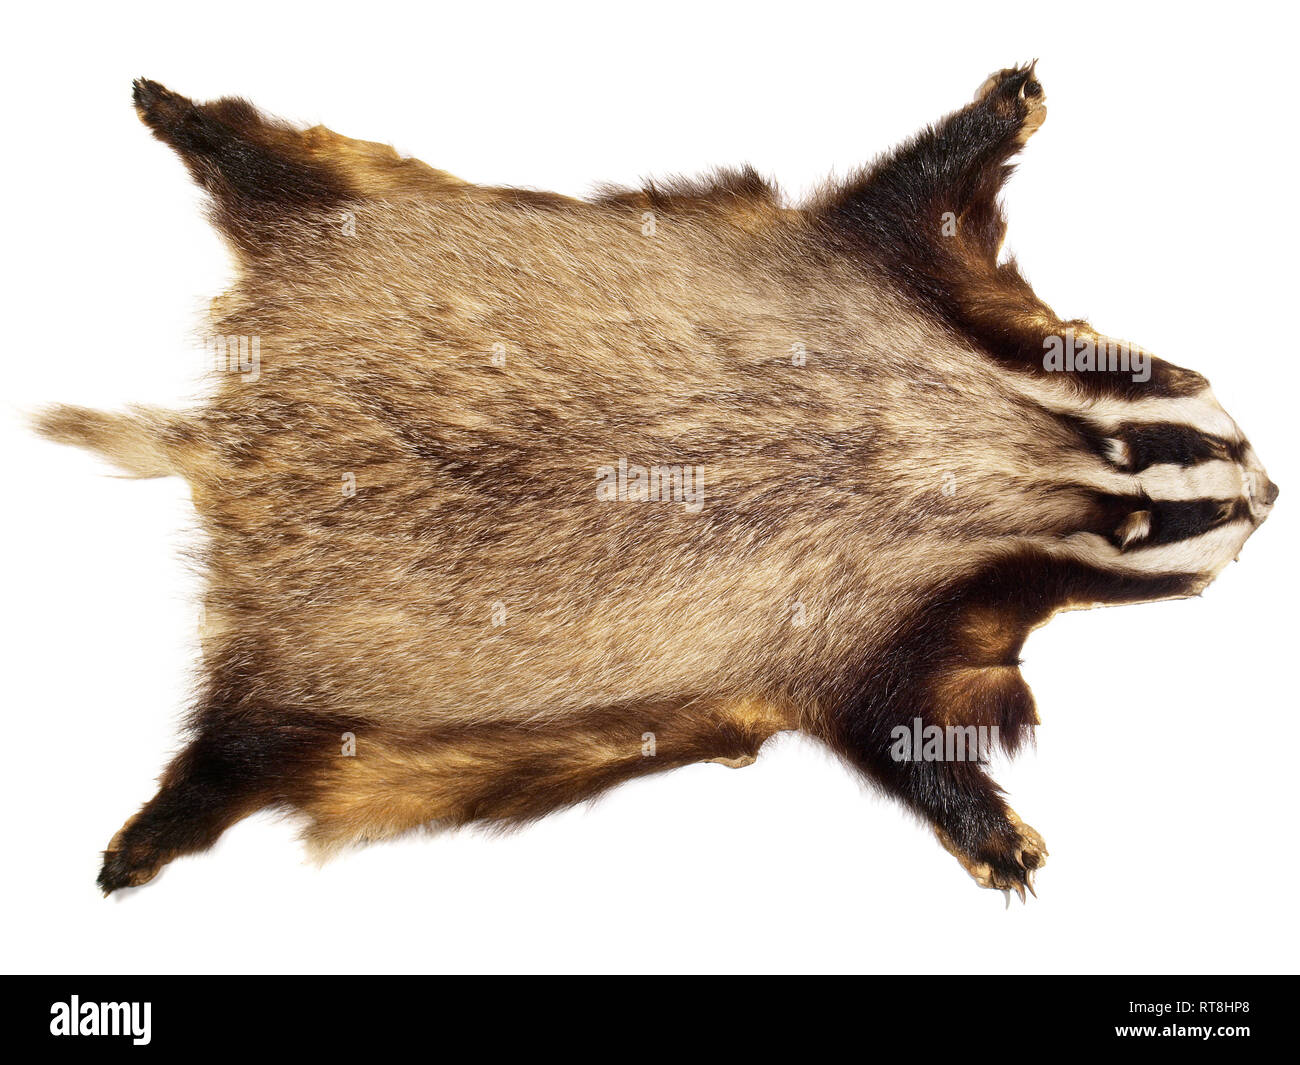 Hunting Trophy - Badger Stock Photo